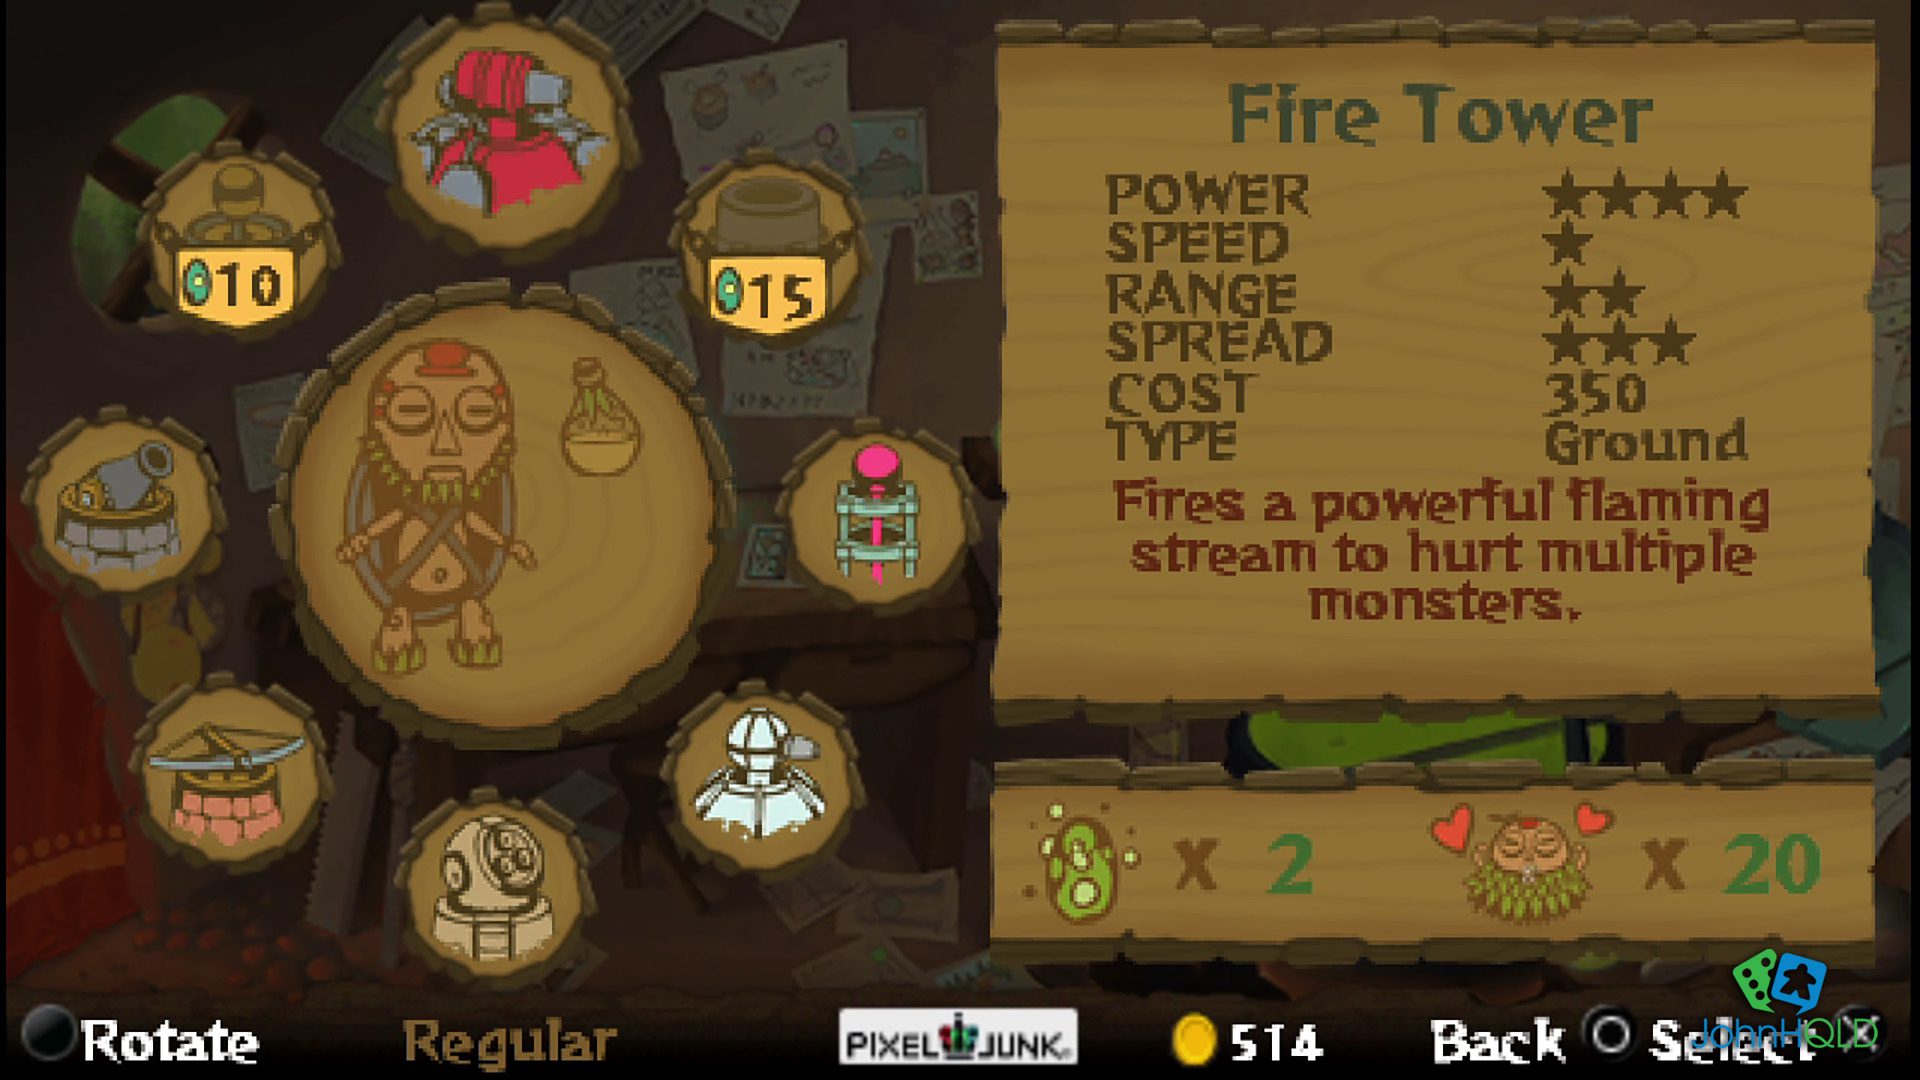 20220919 - Pixeljunk Monsters - You can earn gems to buy more towers each level